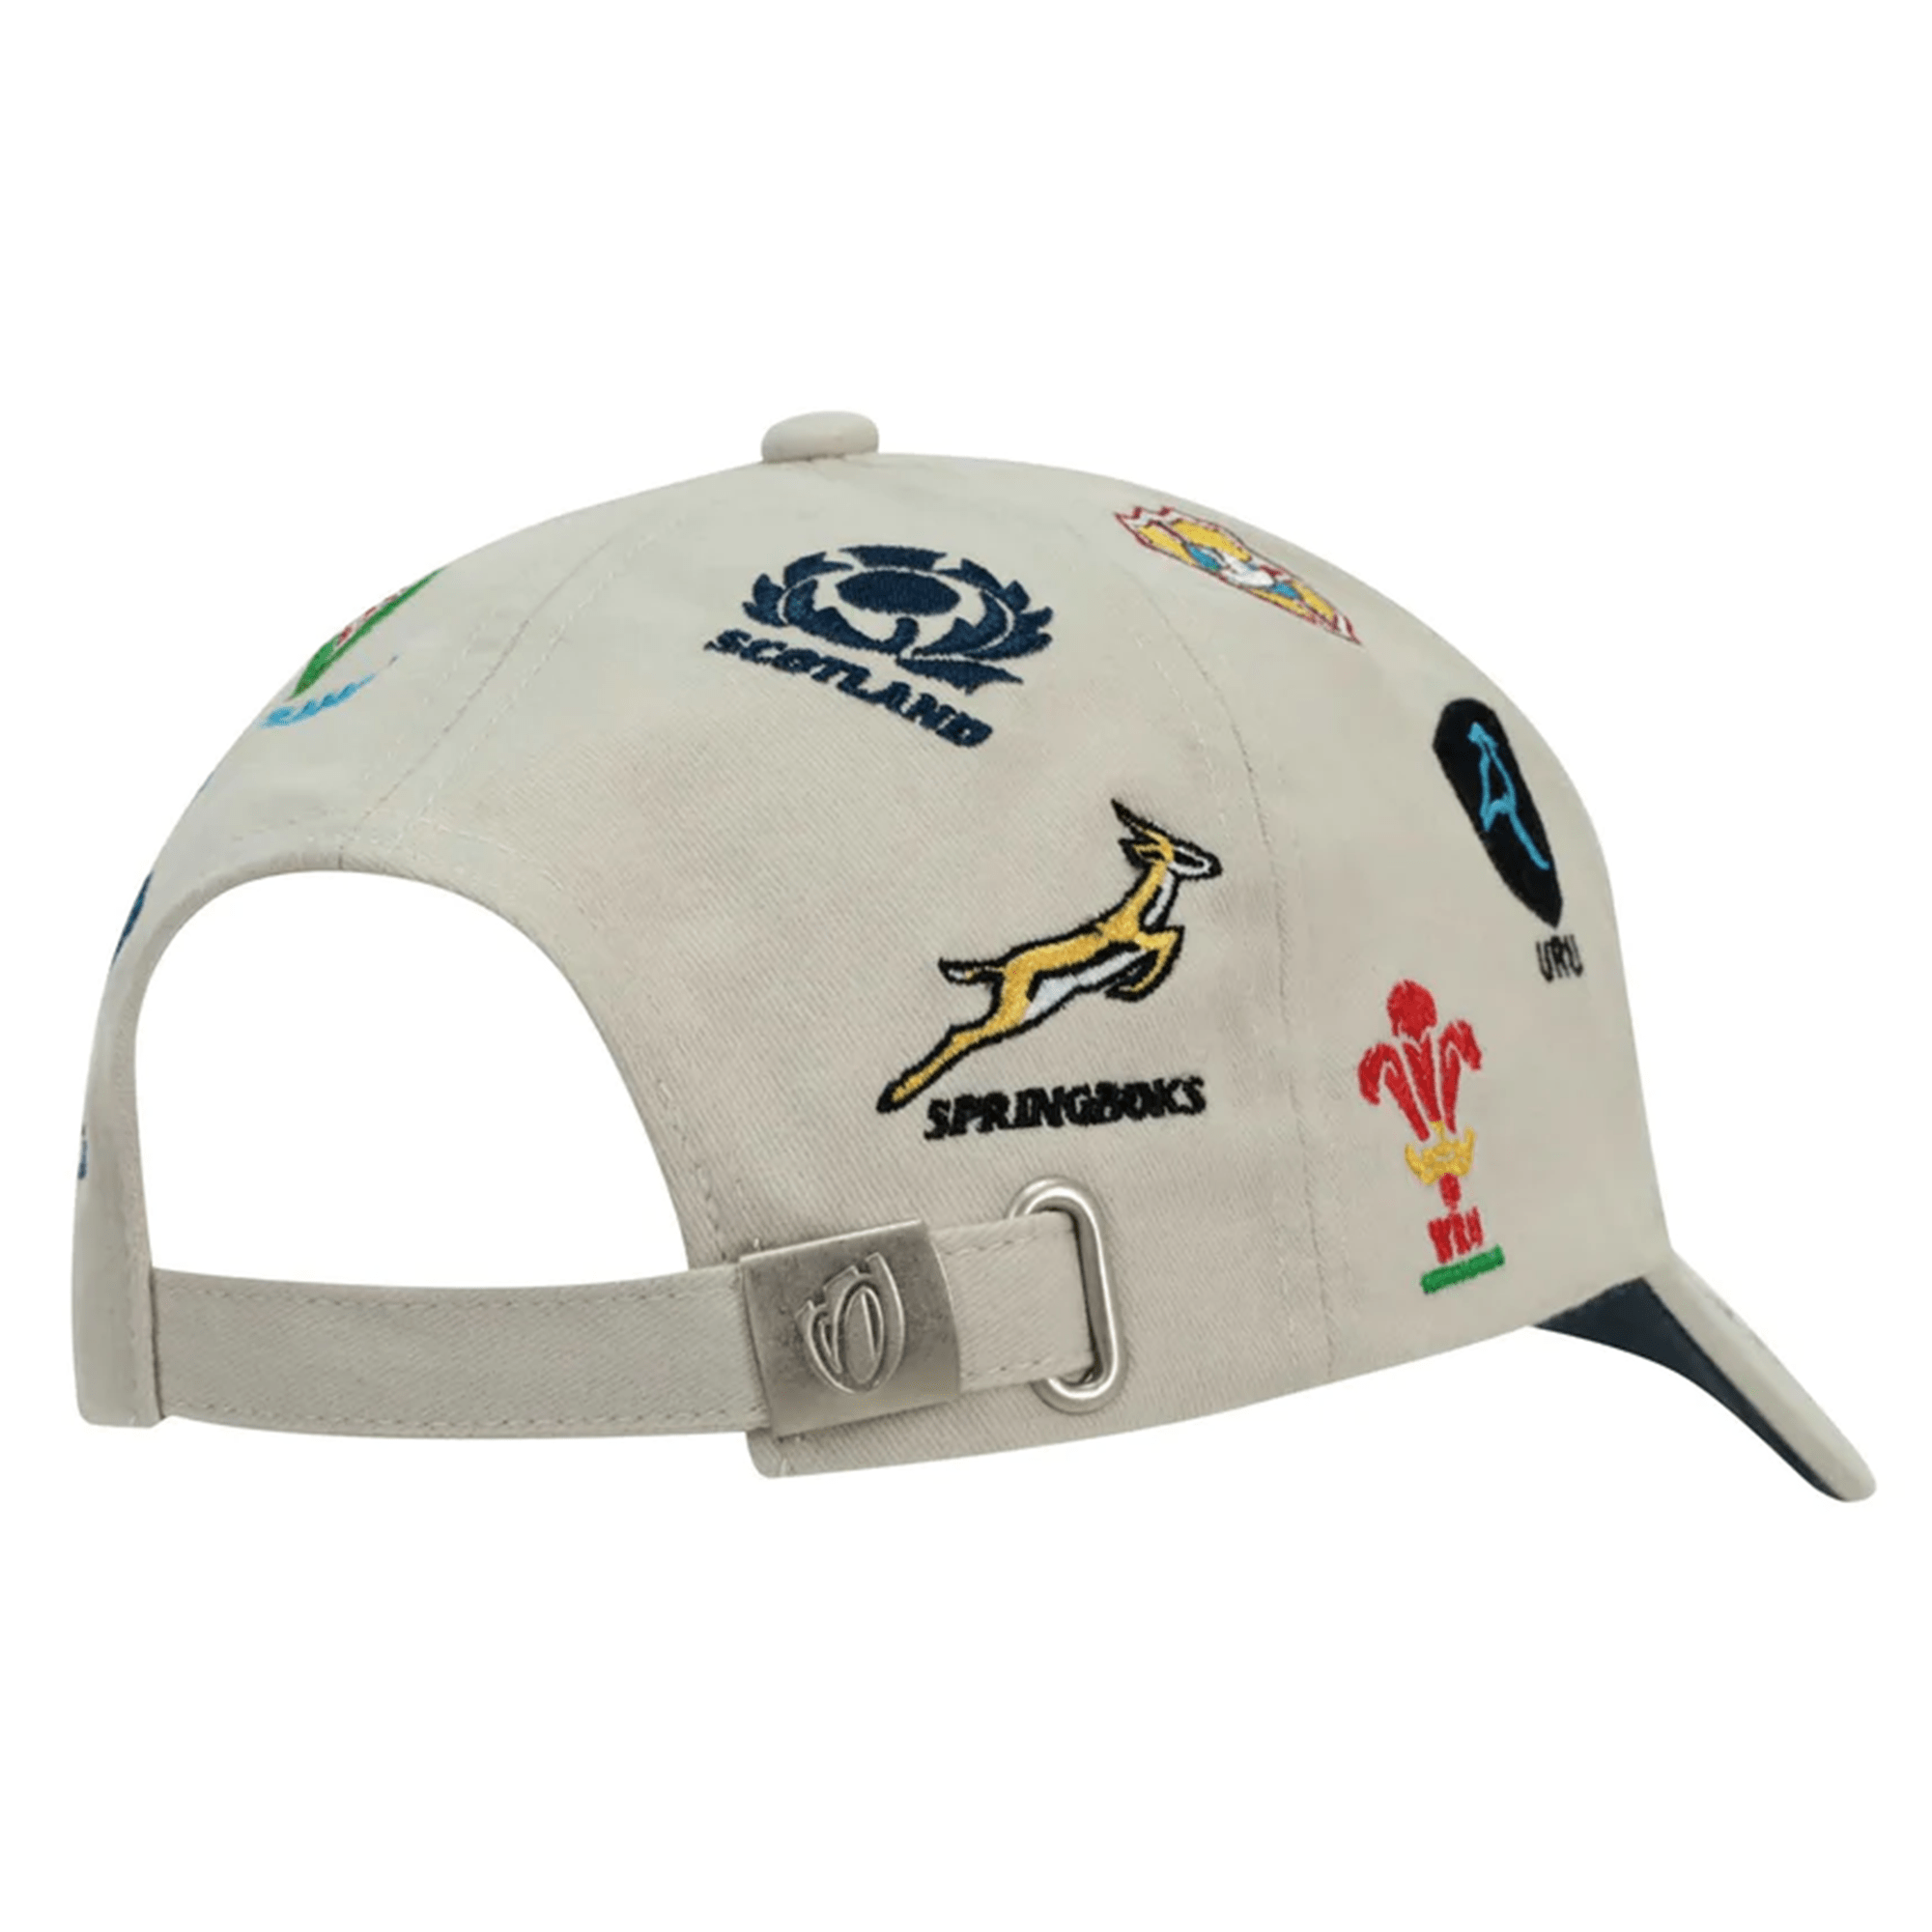 University of Louisville Rugby Cap - World Rugby Shop